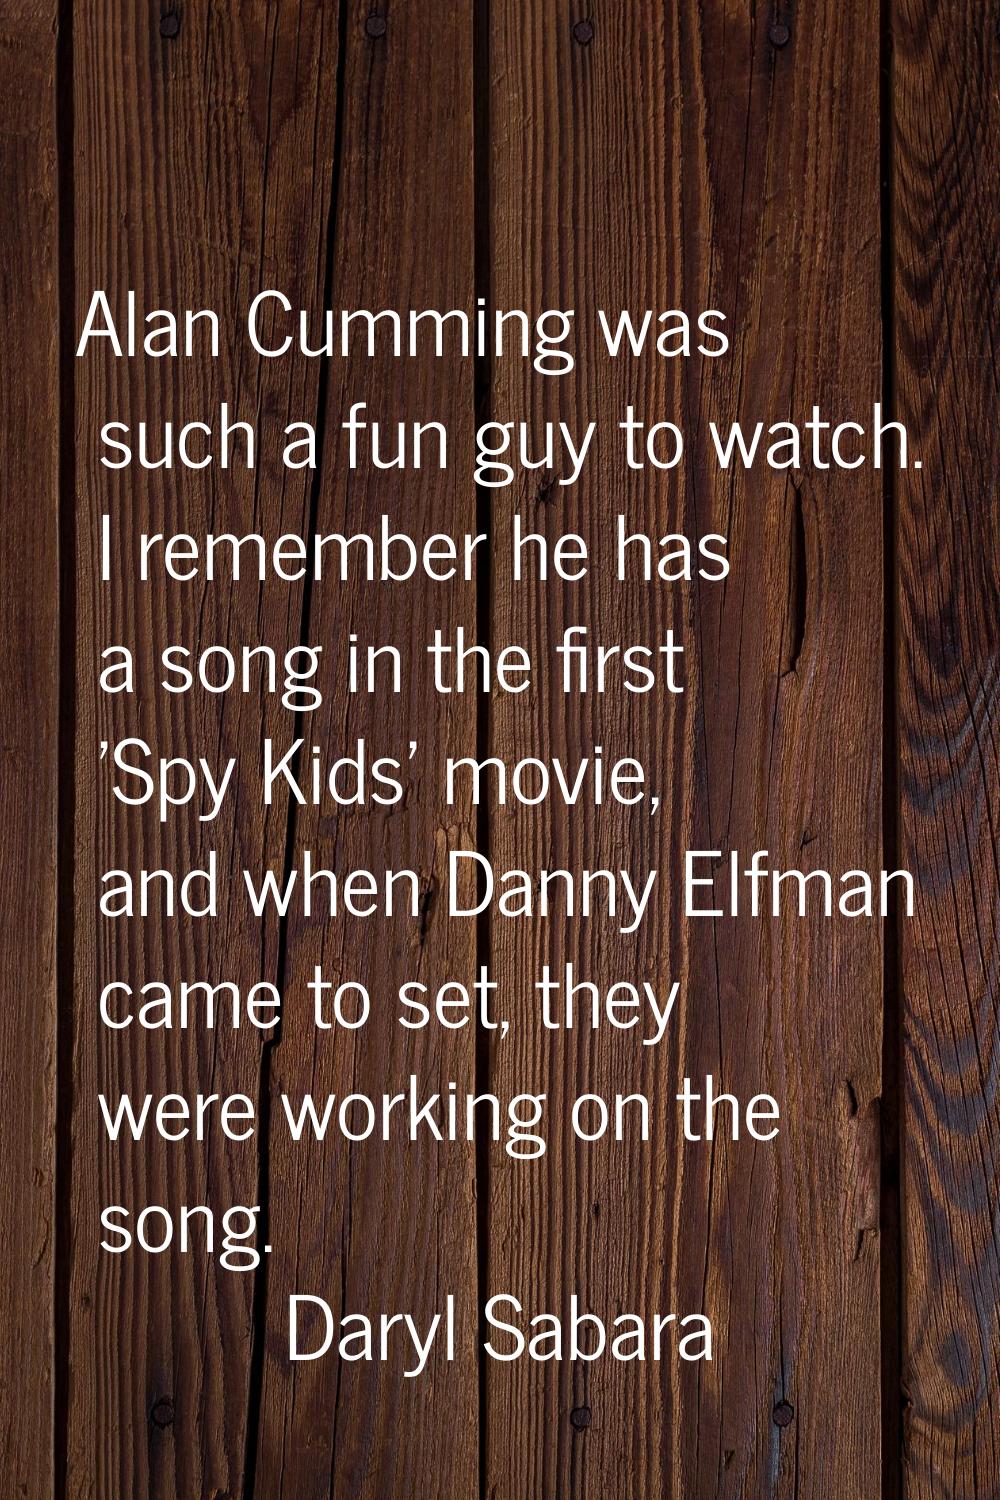 Alan Cumming was such a fun guy to watch. I remember he has a song in the first 'Spy Kids' movie, a